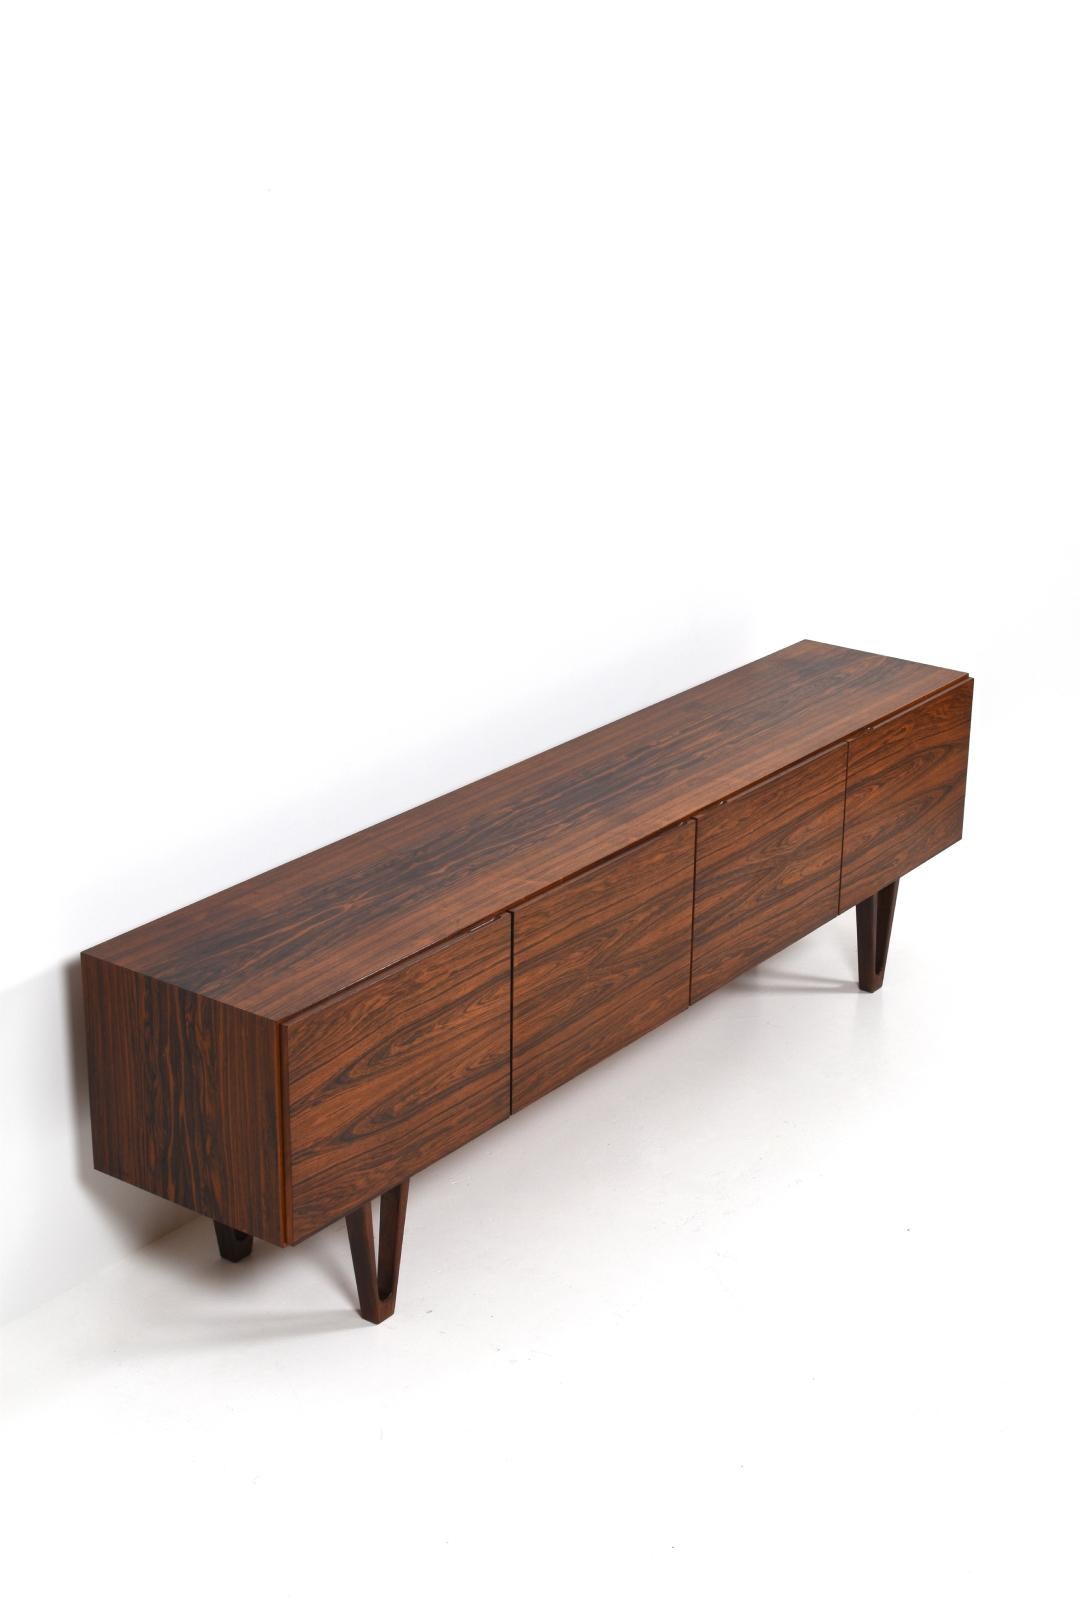 The Ib Kofod-Larsen sideboard for Seffle Möbelfabrik is one of the most exclusive Scandinavian side tables on the market.

This model is highly sought after and we at Gbg Deco call it 